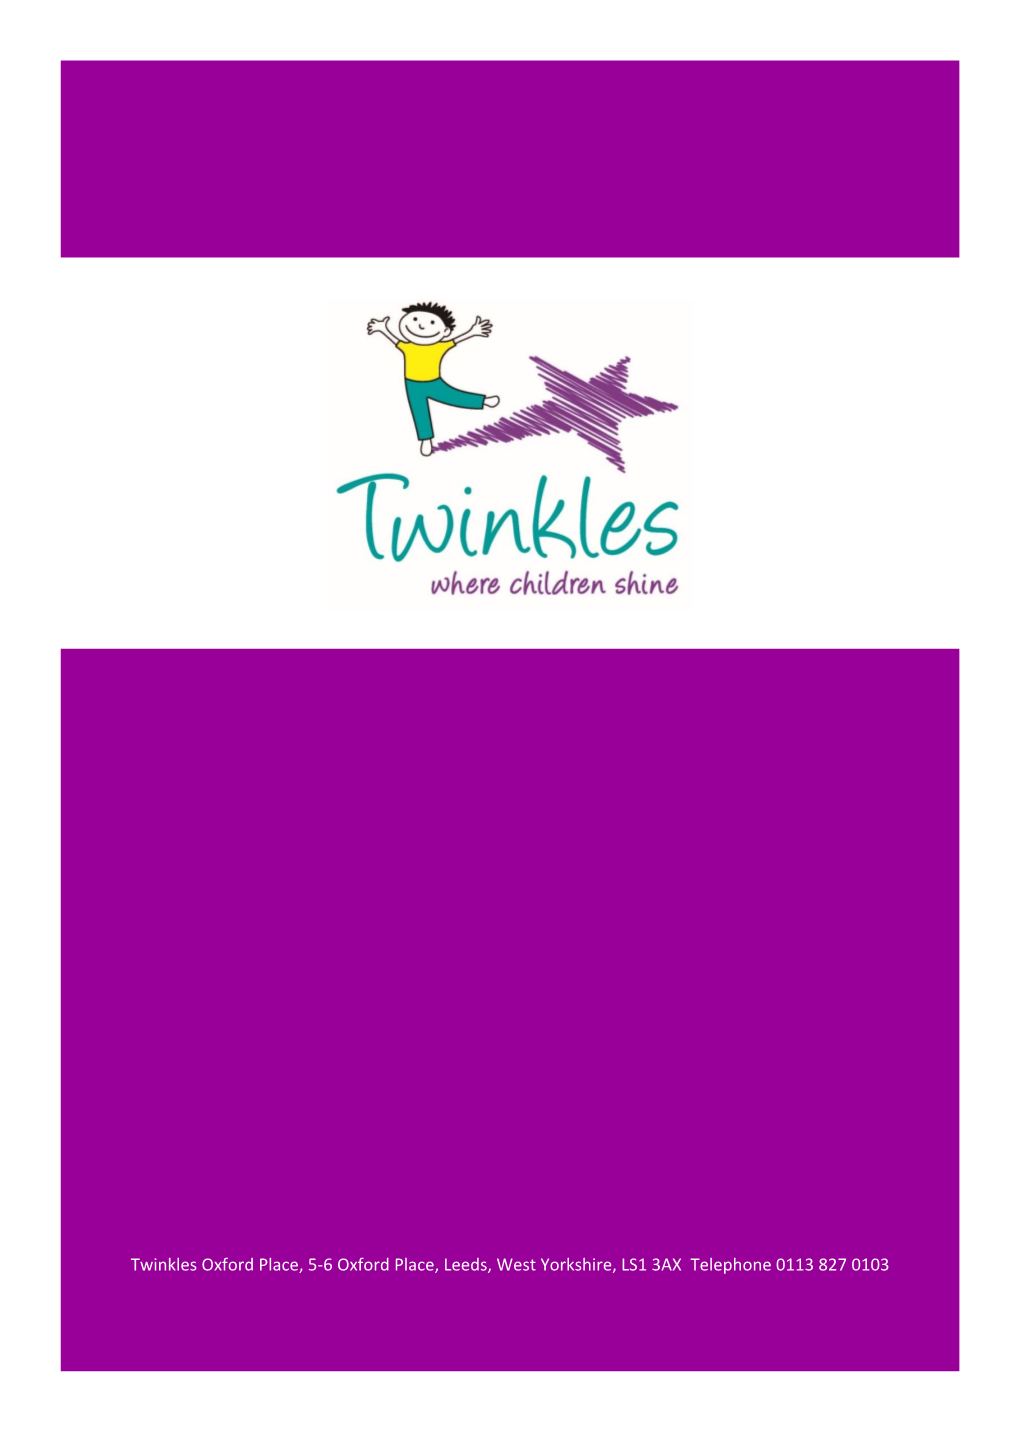 Twinkles Oxford Place, 5-6 Oxford Place, Leeds, West Yorkshire, LS1 3AX Telephone 0113 827 0103